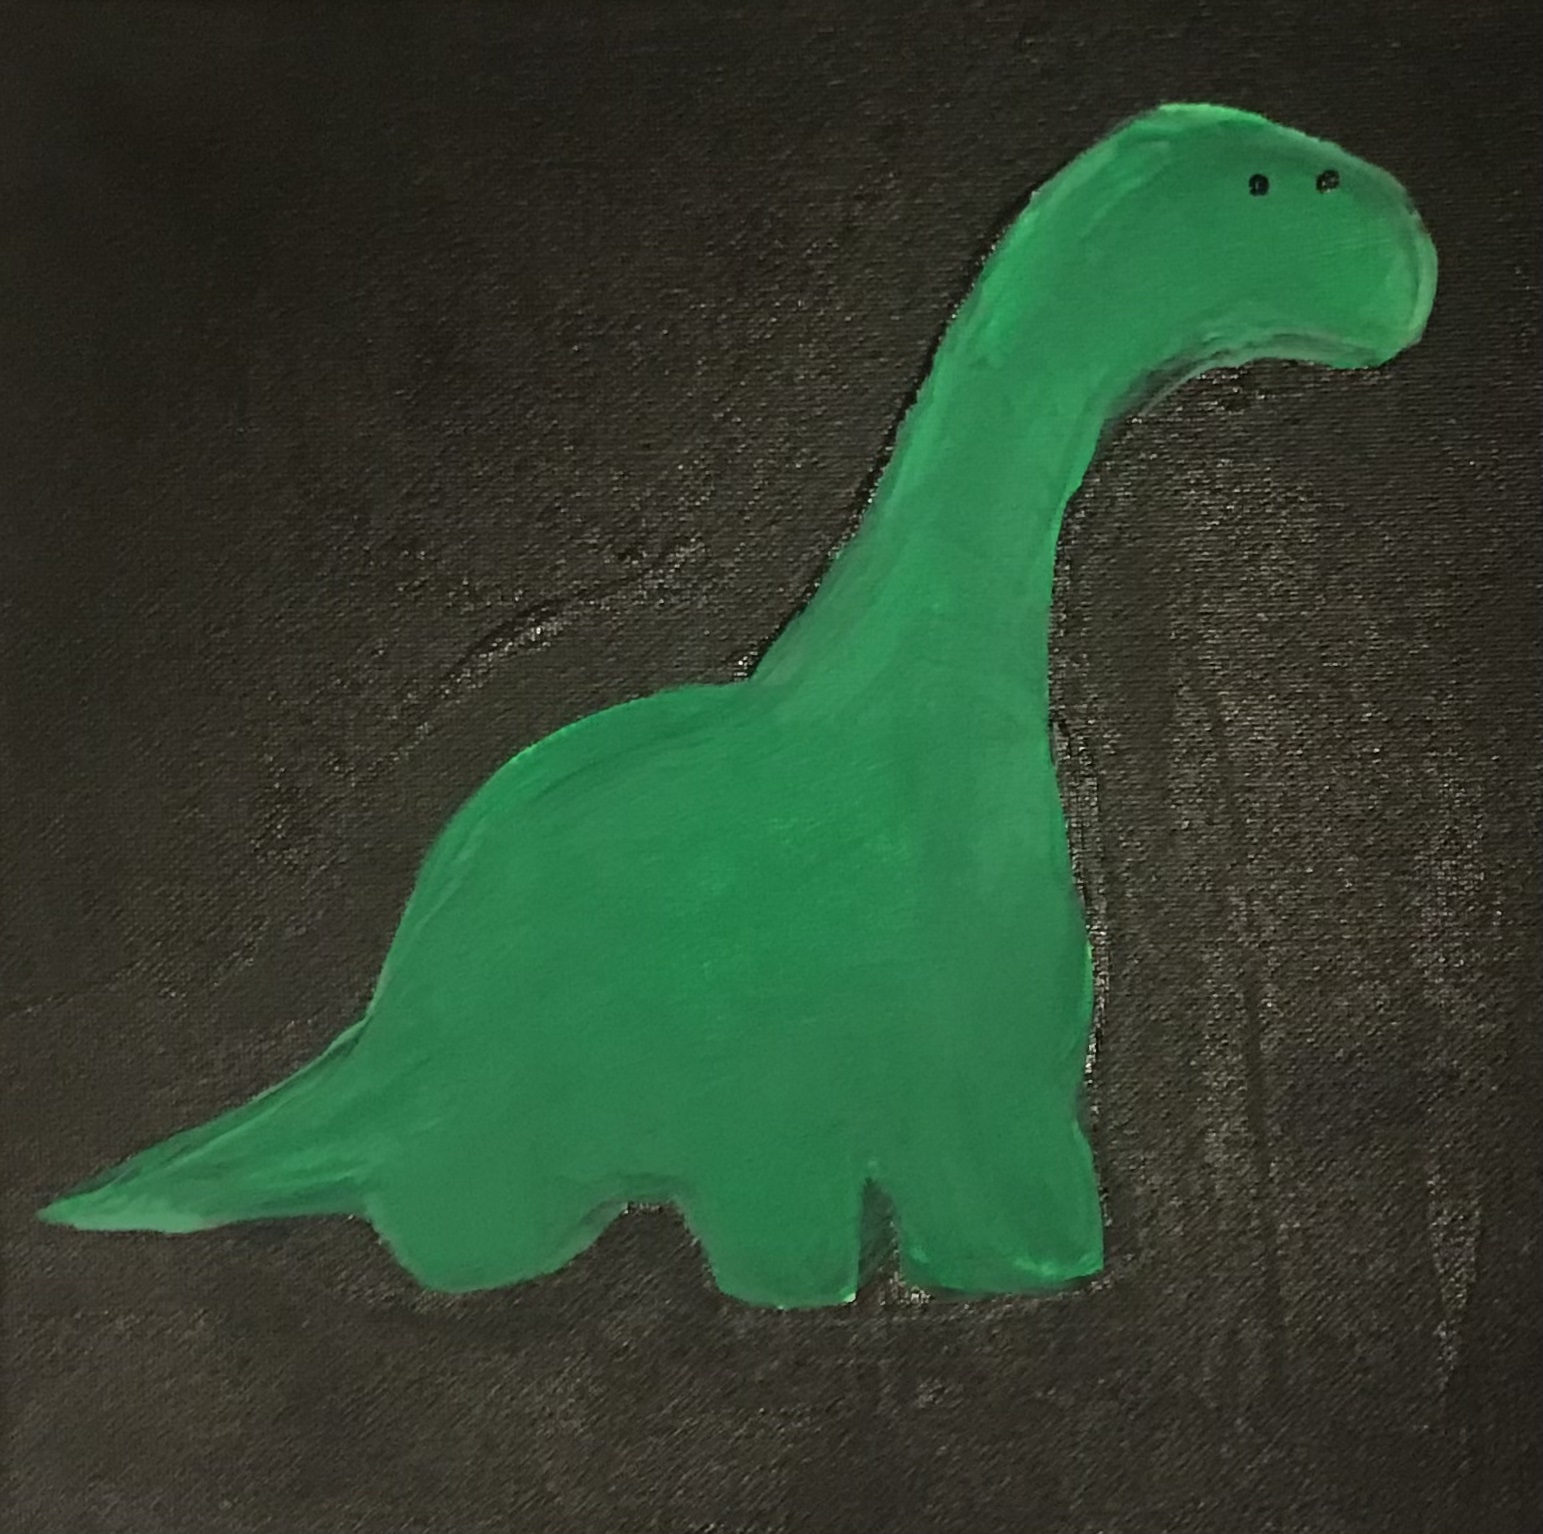 A green Deno on a black background in acrylic paint.